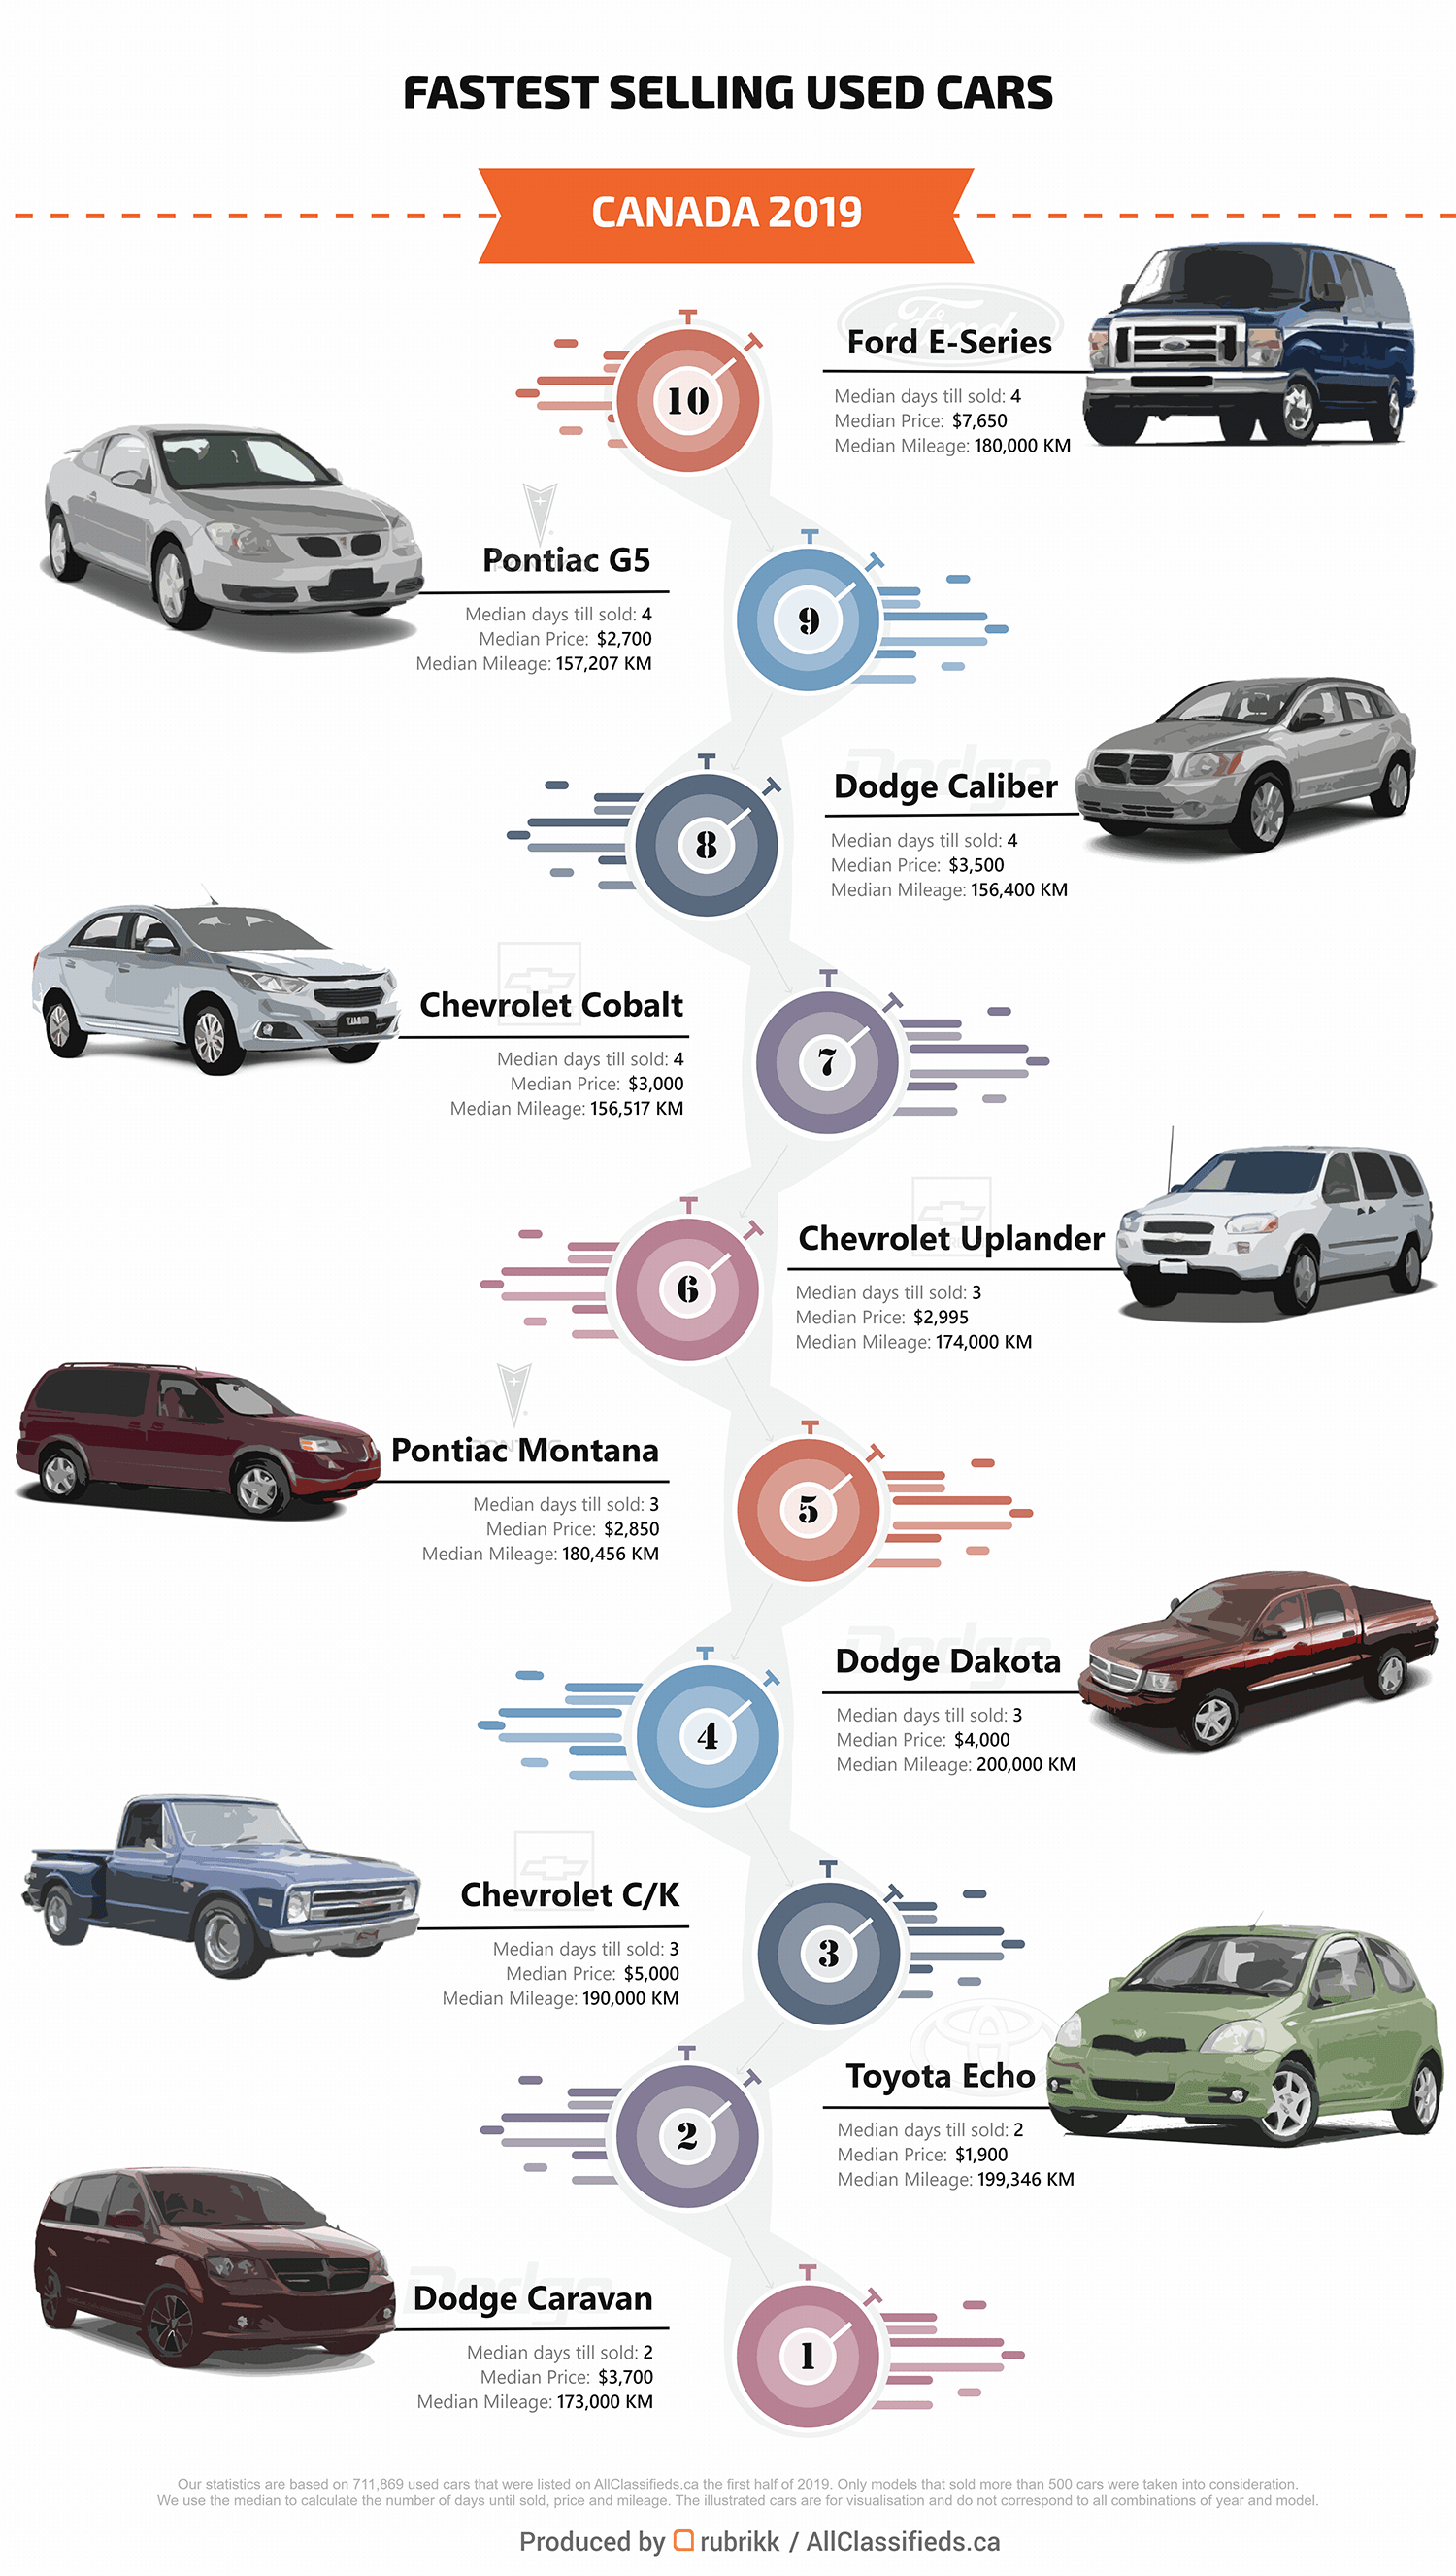 Fastest sold cars